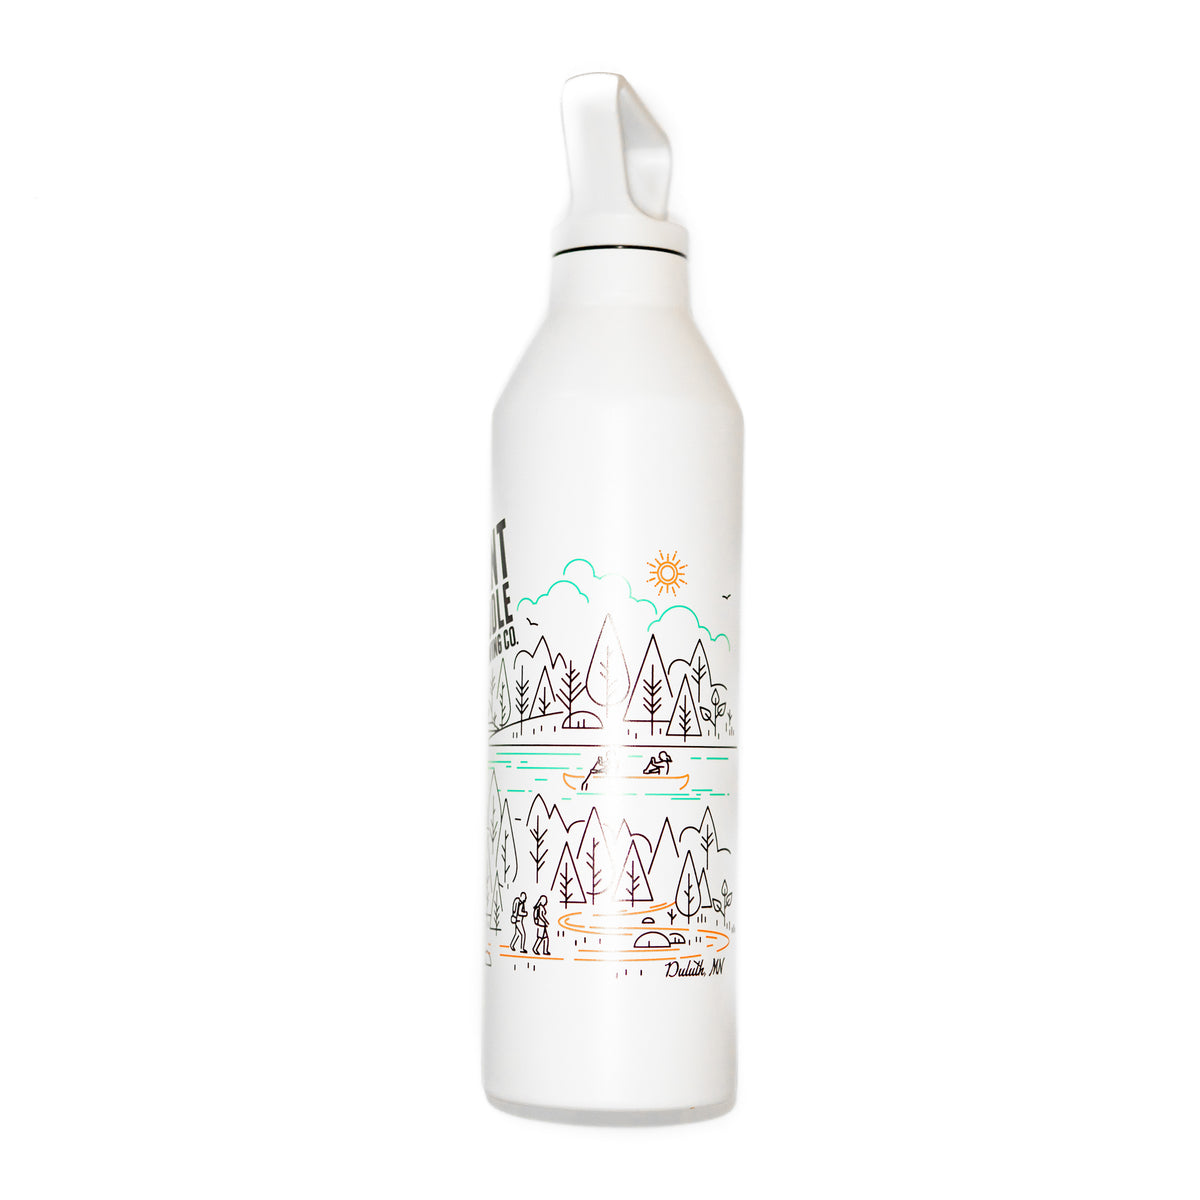 Live Wildly x MiiR 23 oz. Insulated Water Bottle - Spark